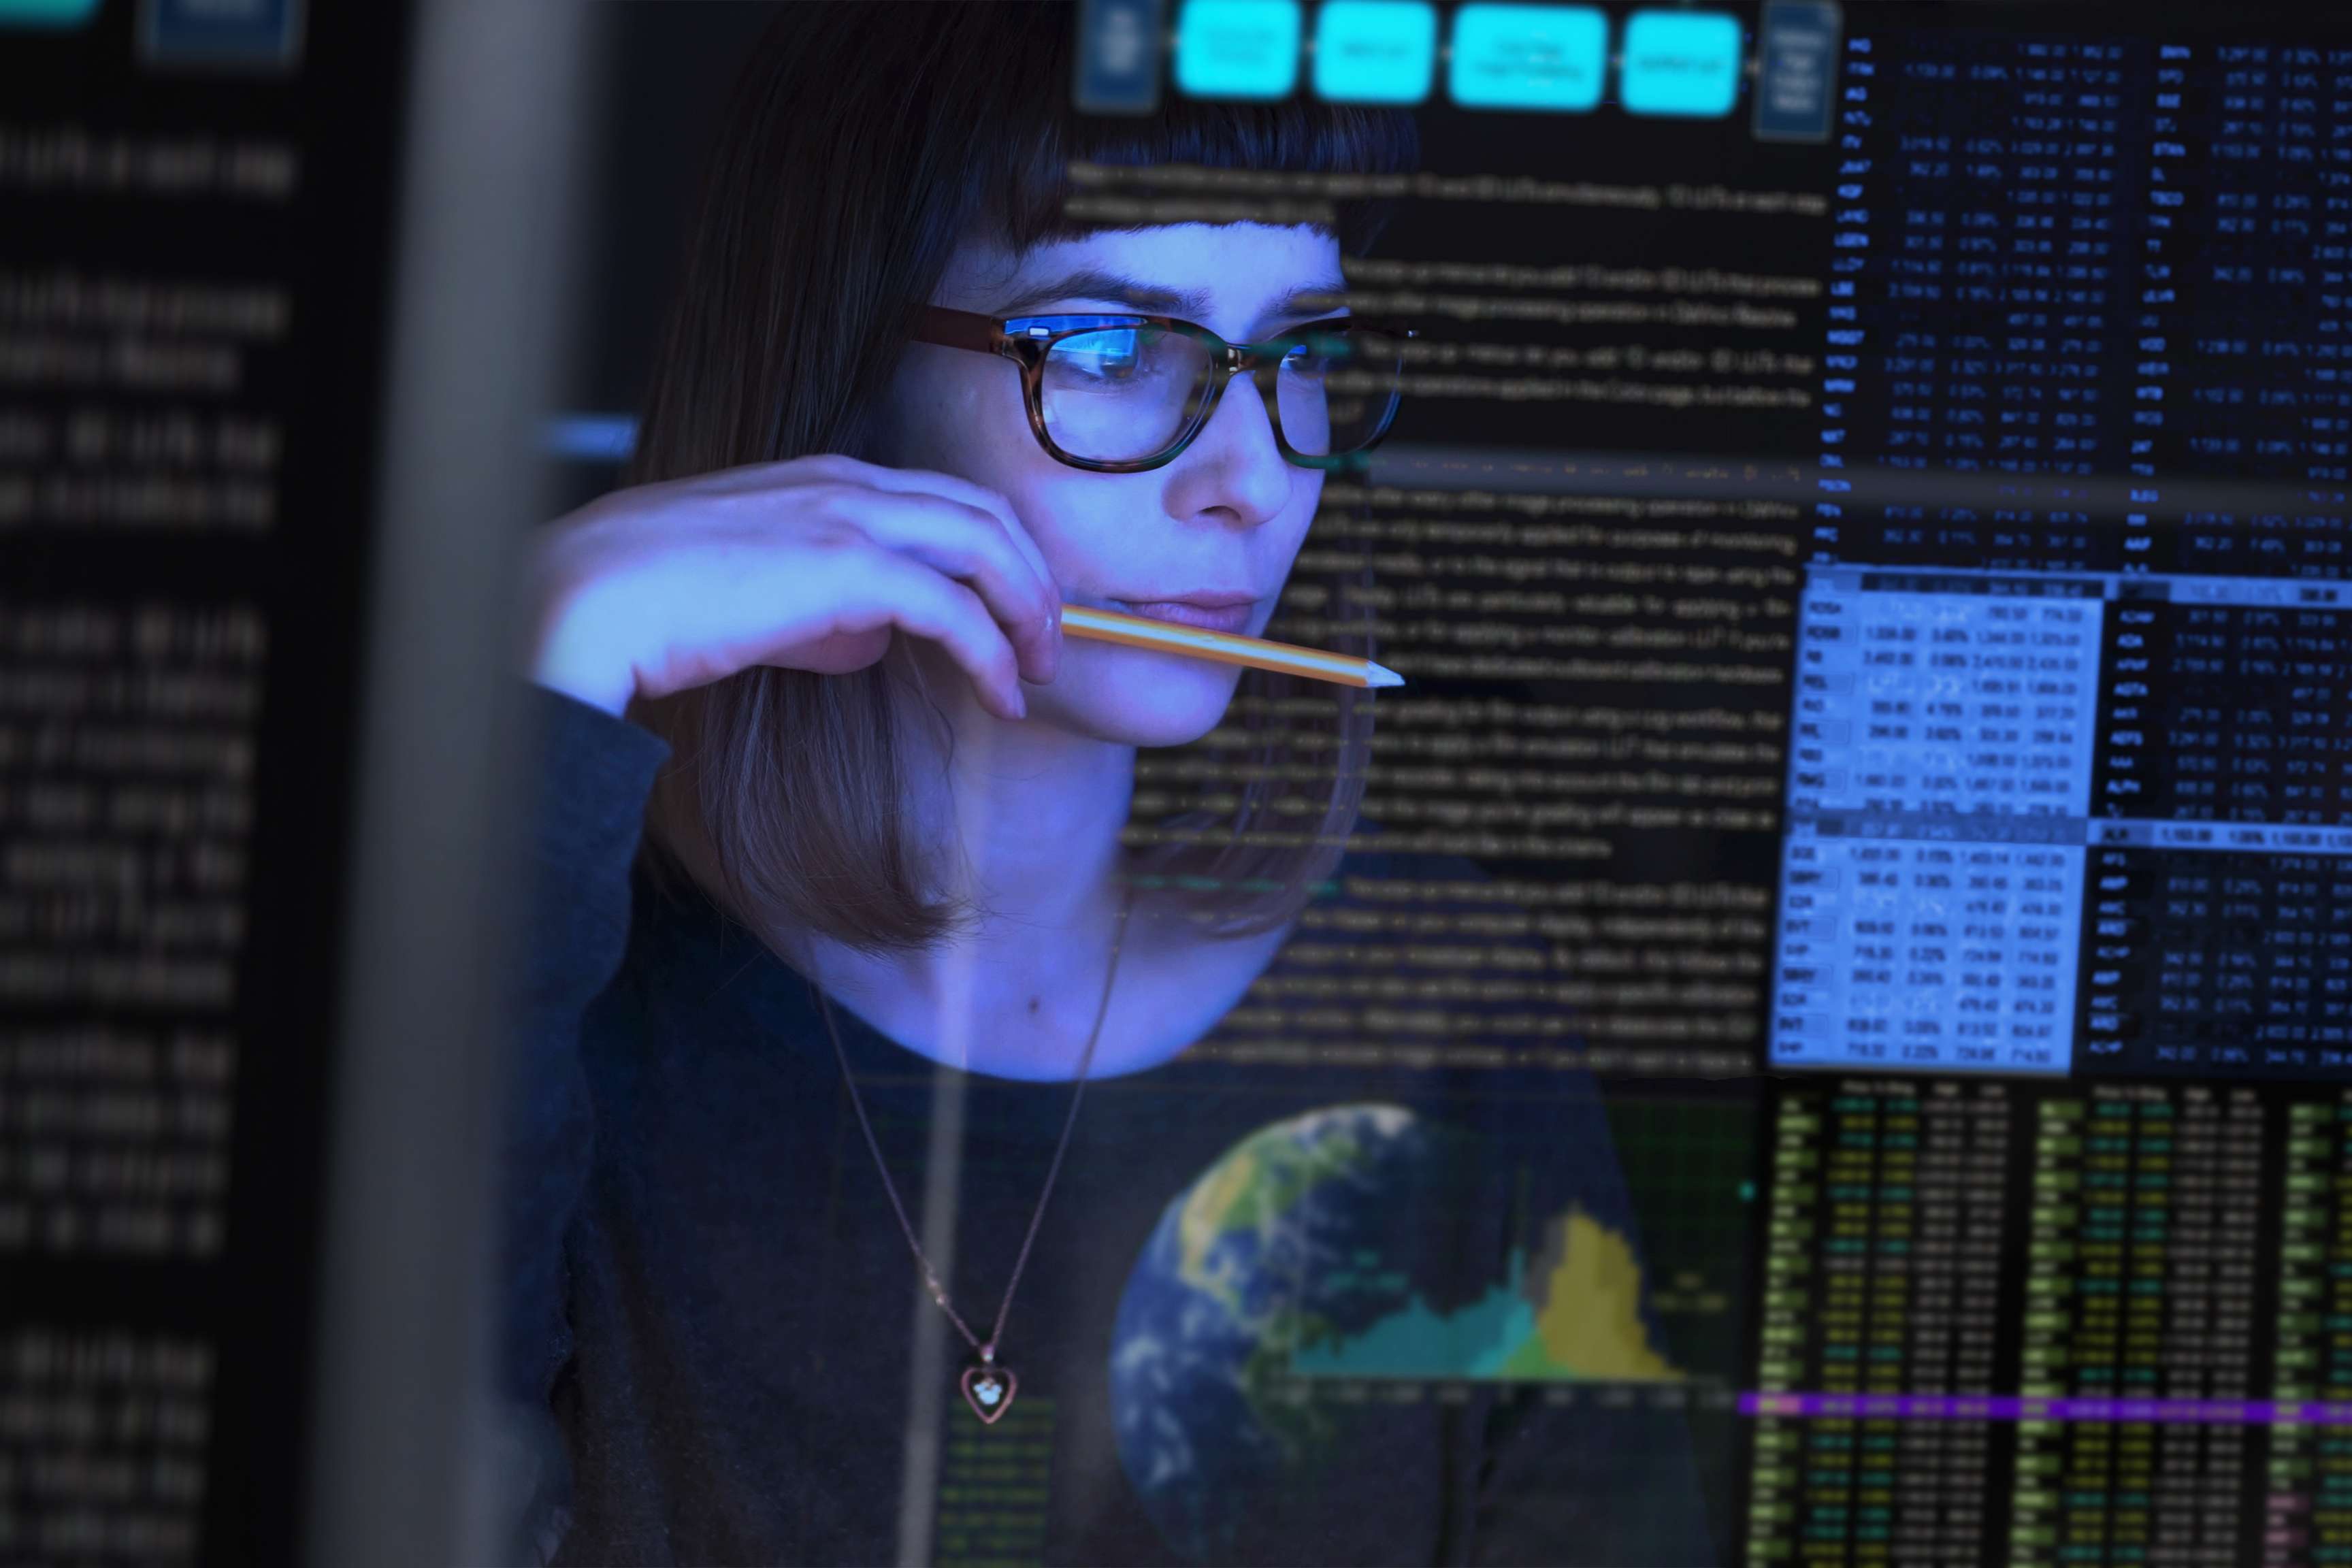 Woman wearing glasses and holding a pencil in her hand and putting it to her lips while looking at a screen with data sets.